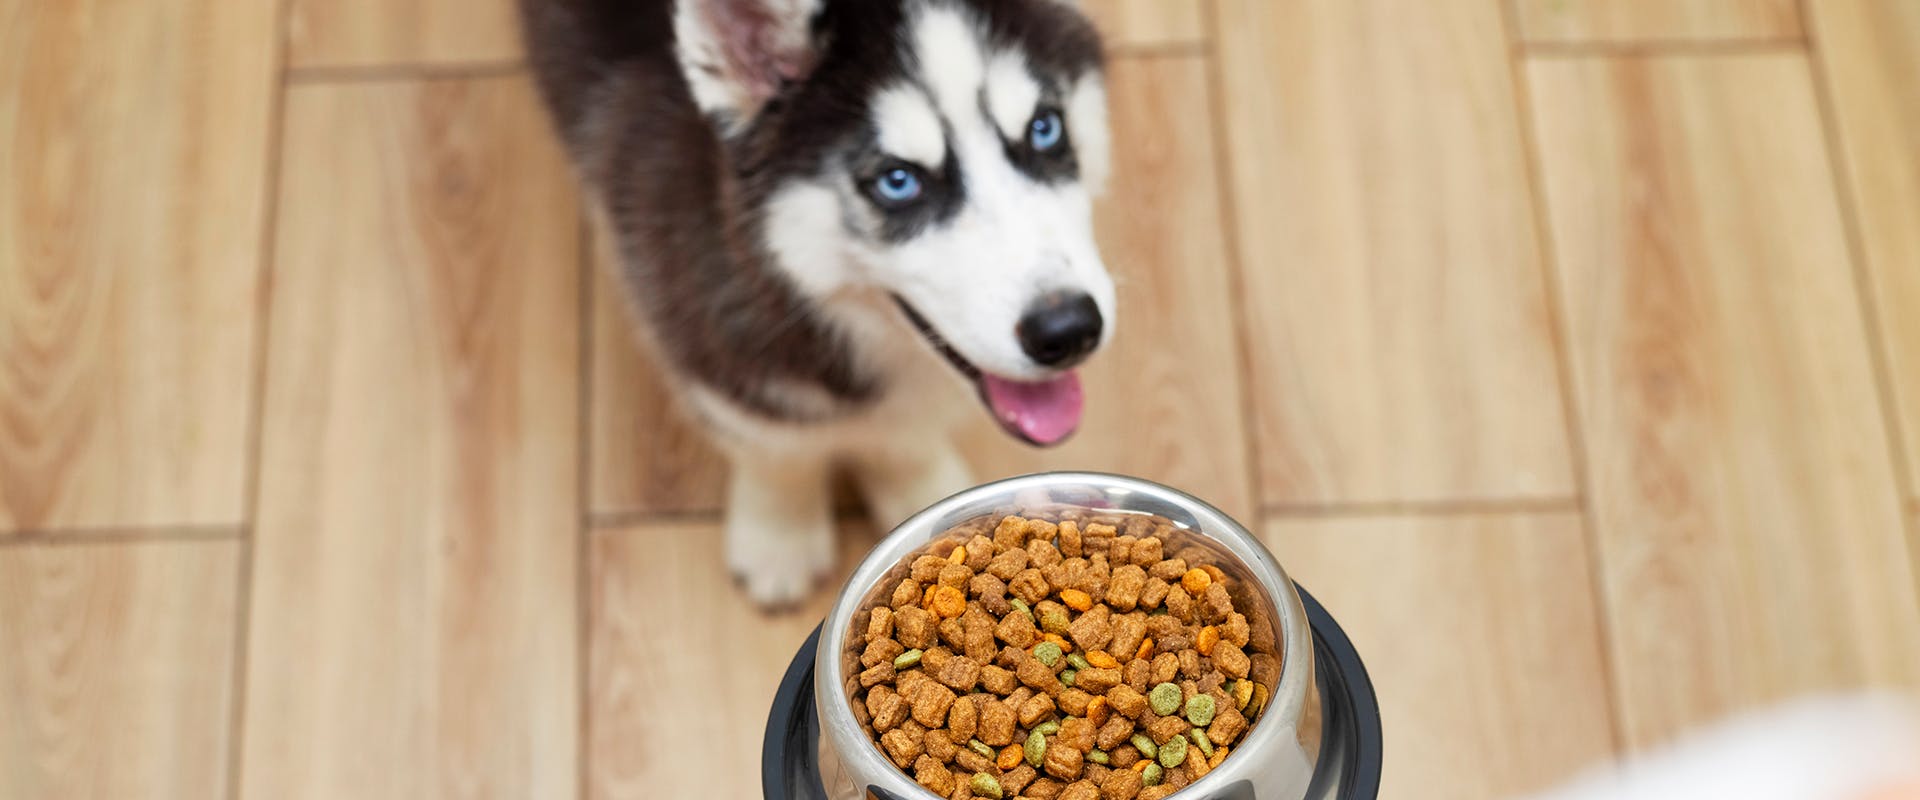 https://images.prismic.io/trustedhousesitters/020a5319-a616-4b65-9dc5-24071bd41bb2_best+dog+food+bowls+2.png?auto=compress,format&rect=0,0,1920,800&w=1920&h=800